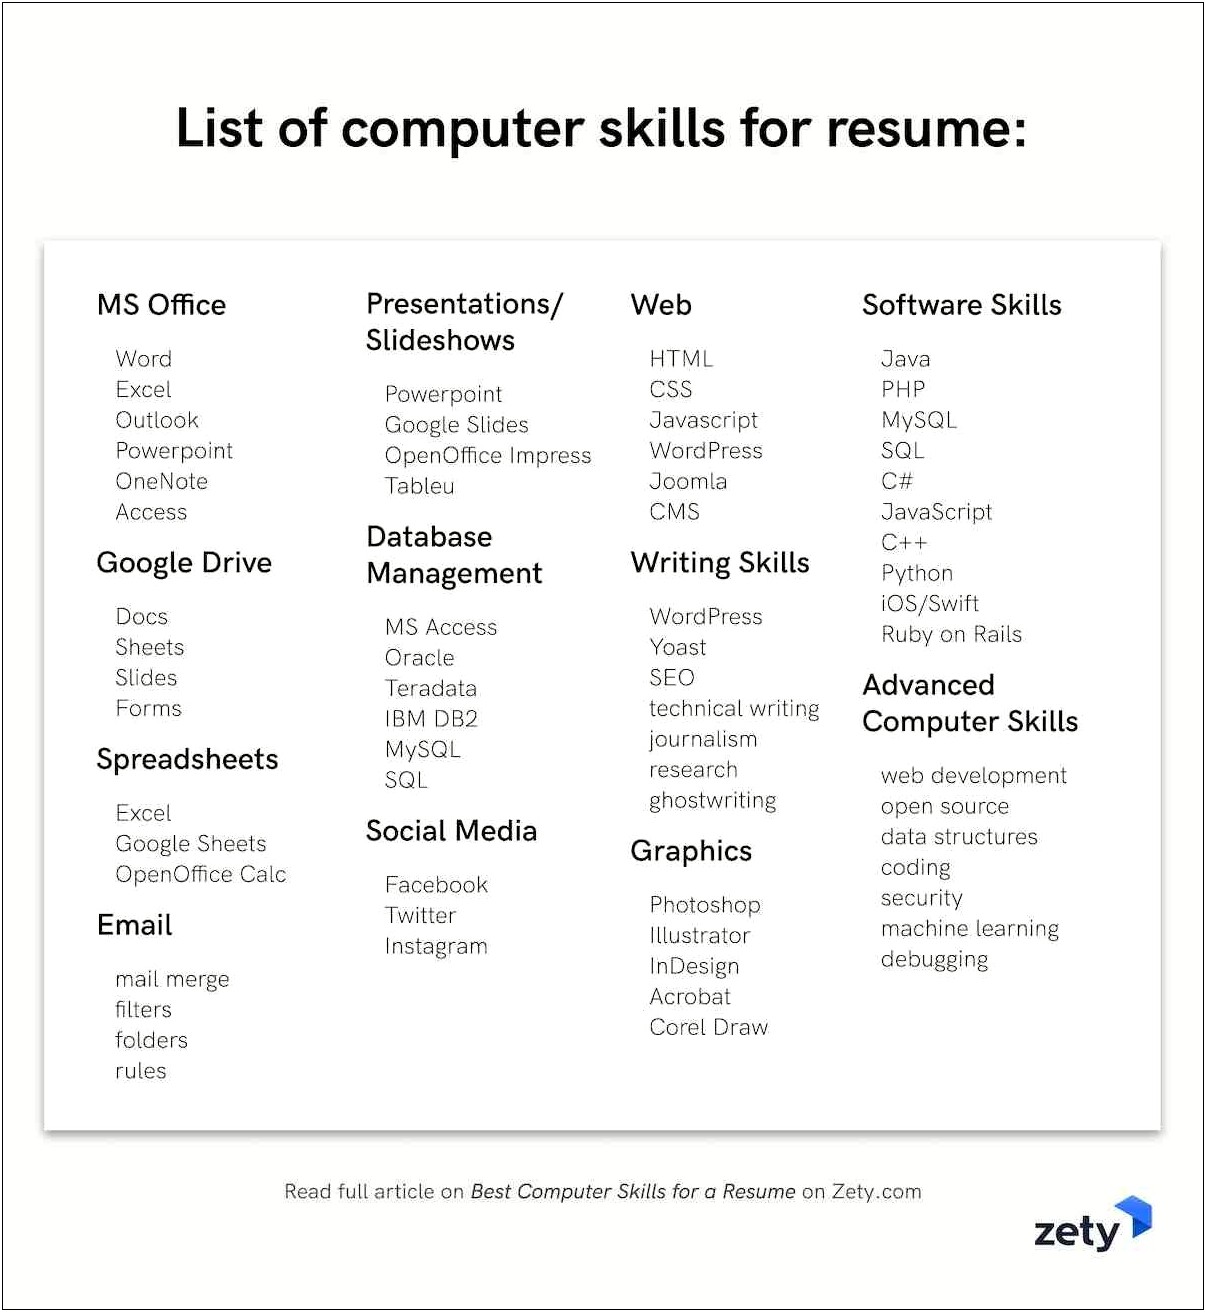 Computer Applications To Put On Resume